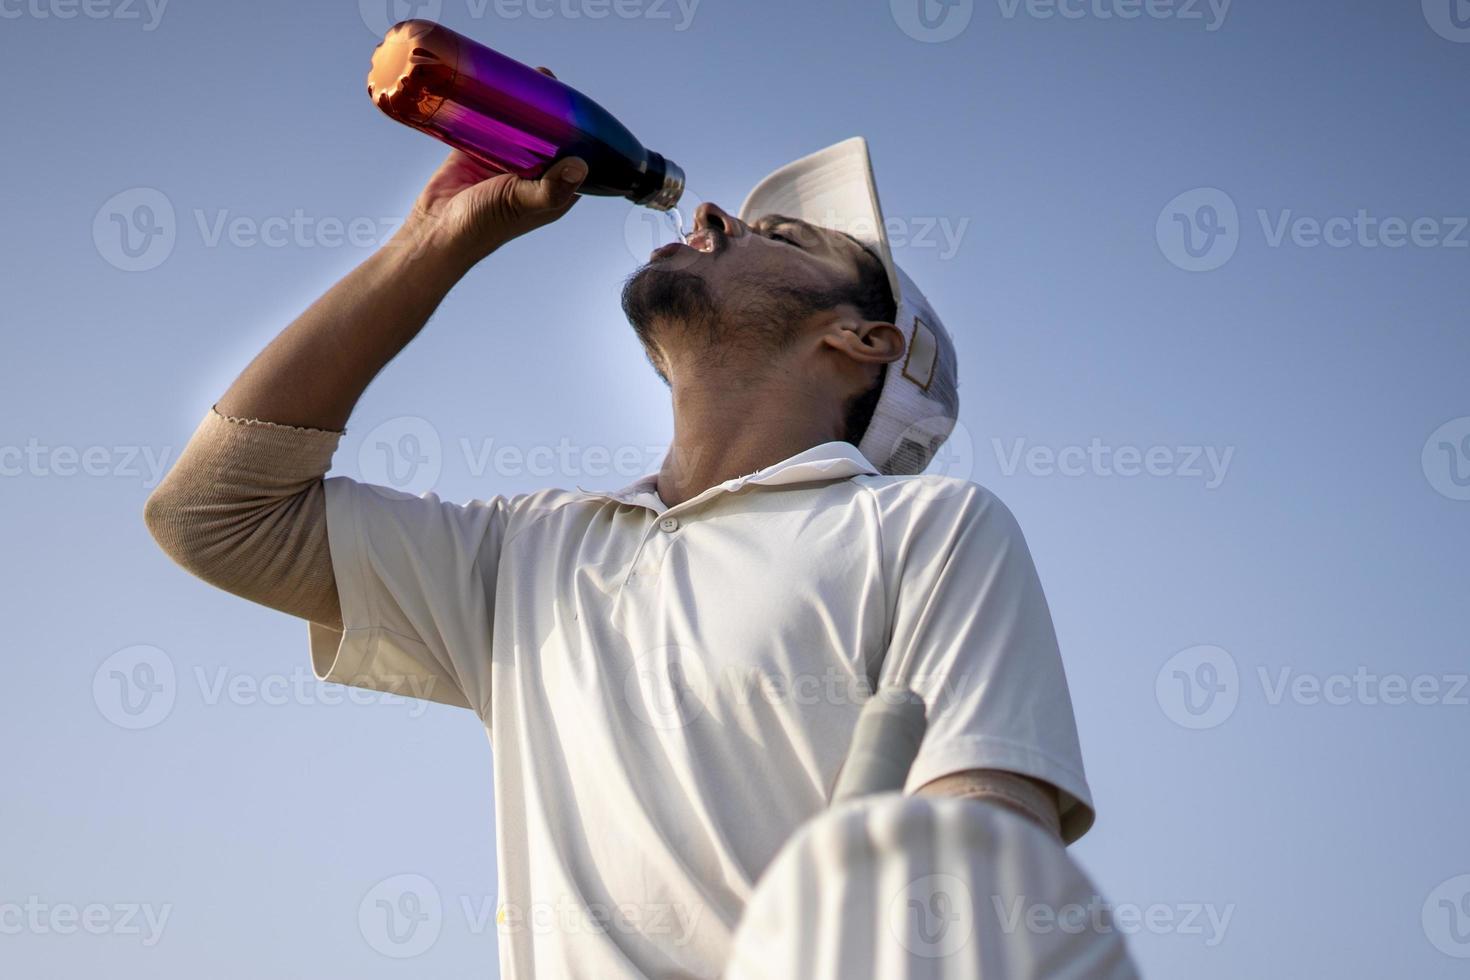 Indian cricket players in white dress of test matches drinking water from a bottle in the cricket field. photo